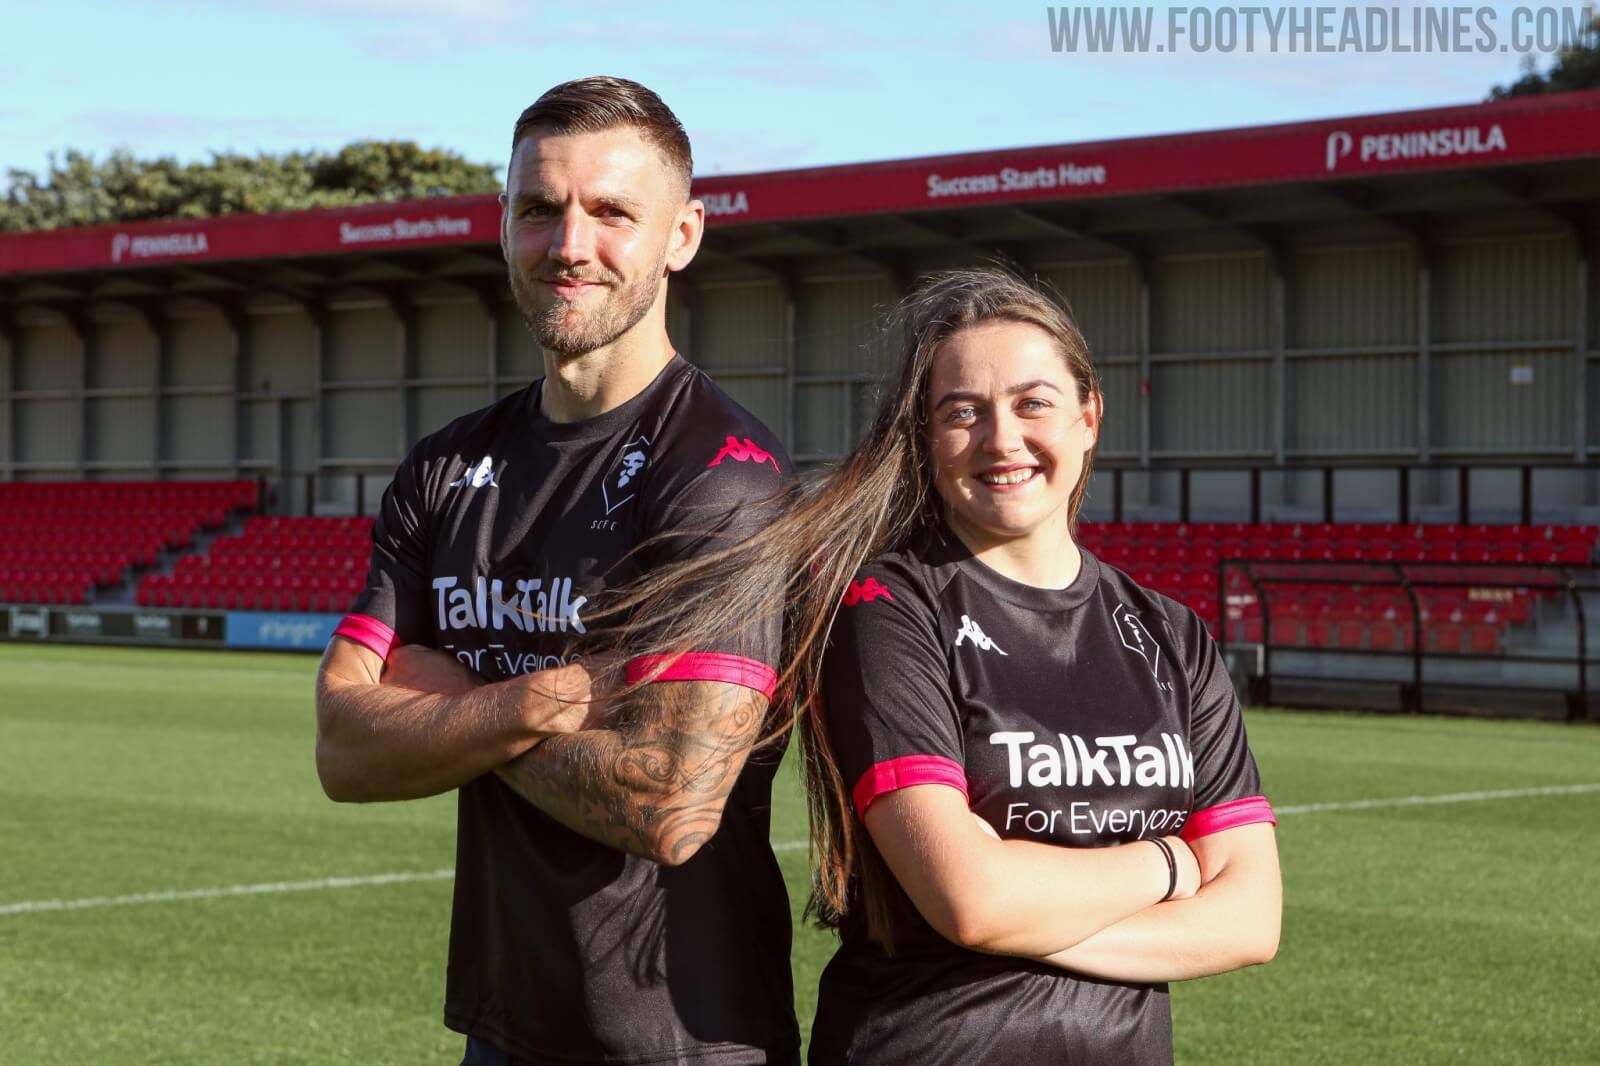 Salford City 20-21 Home, Away & Third Kits Unveiled - Footy Headlines